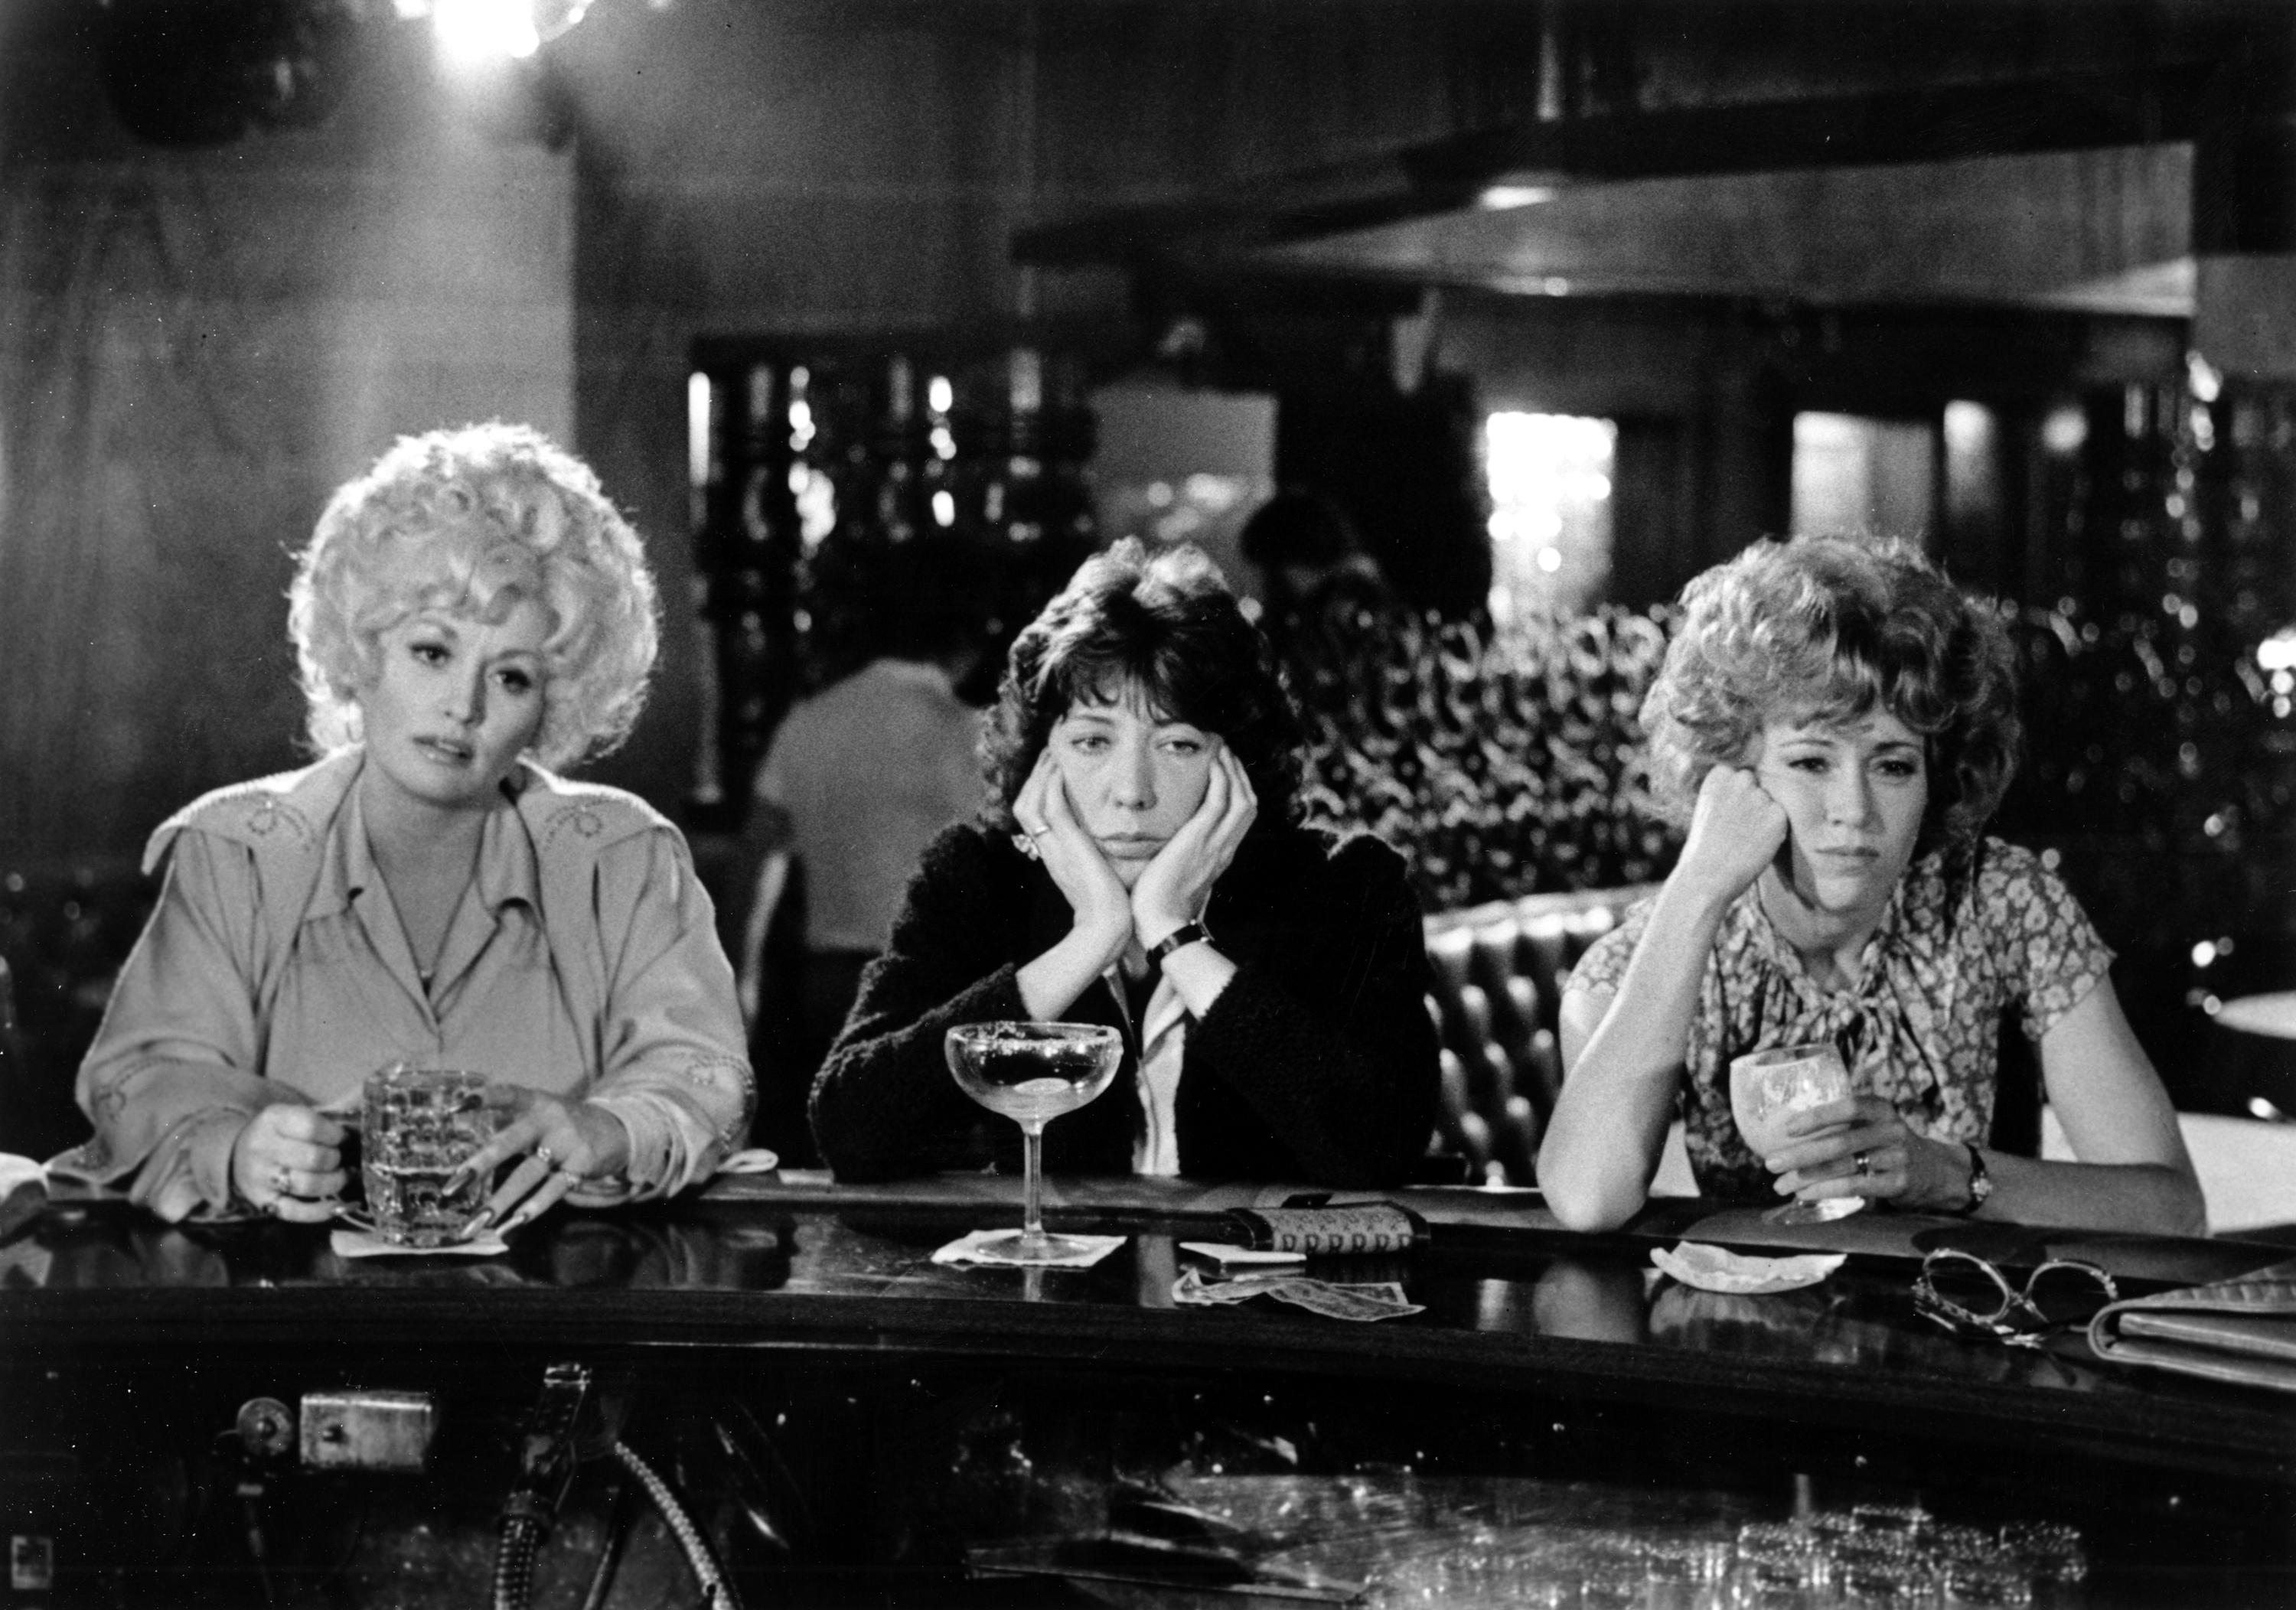 Dolly Parton, Lily Tomlin and Jane Fonda sit at a bar in scene from '9 to 5' 